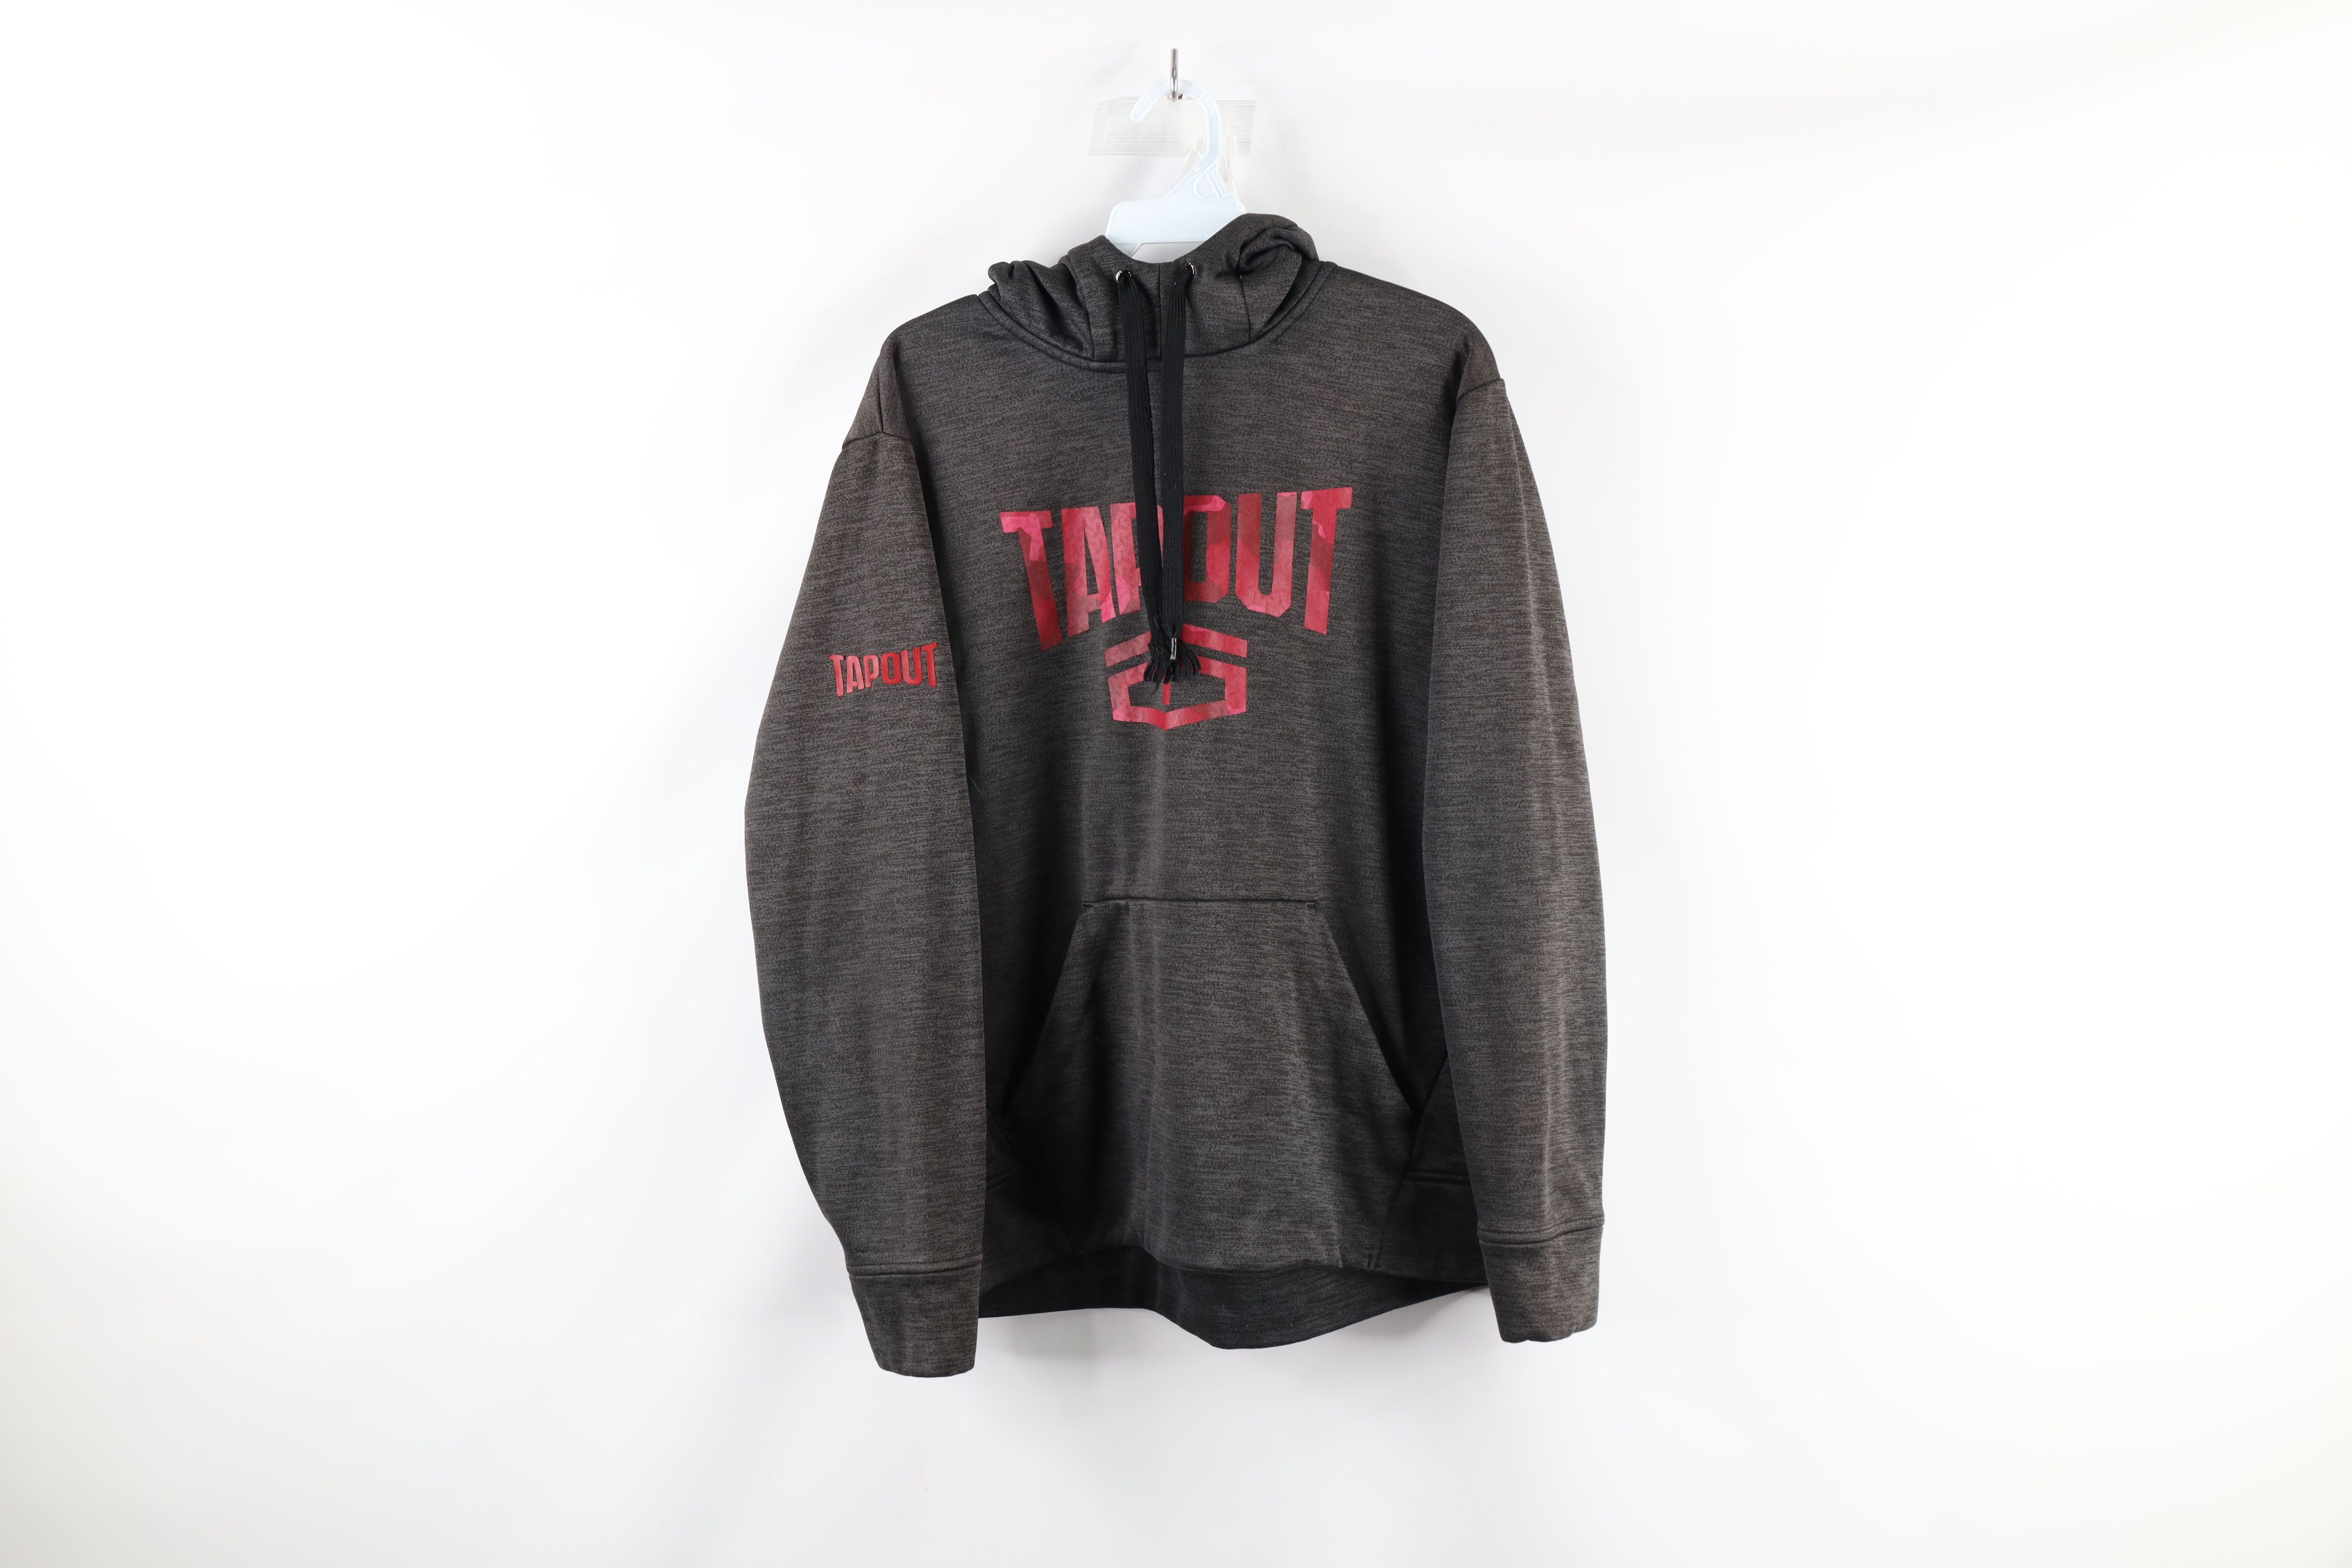 Vintage Tapout UFC MMA Fighting Out Hoodie Sweatshirt Heather Gray Size US M / EU 48-50 / 2 - 1 Preview